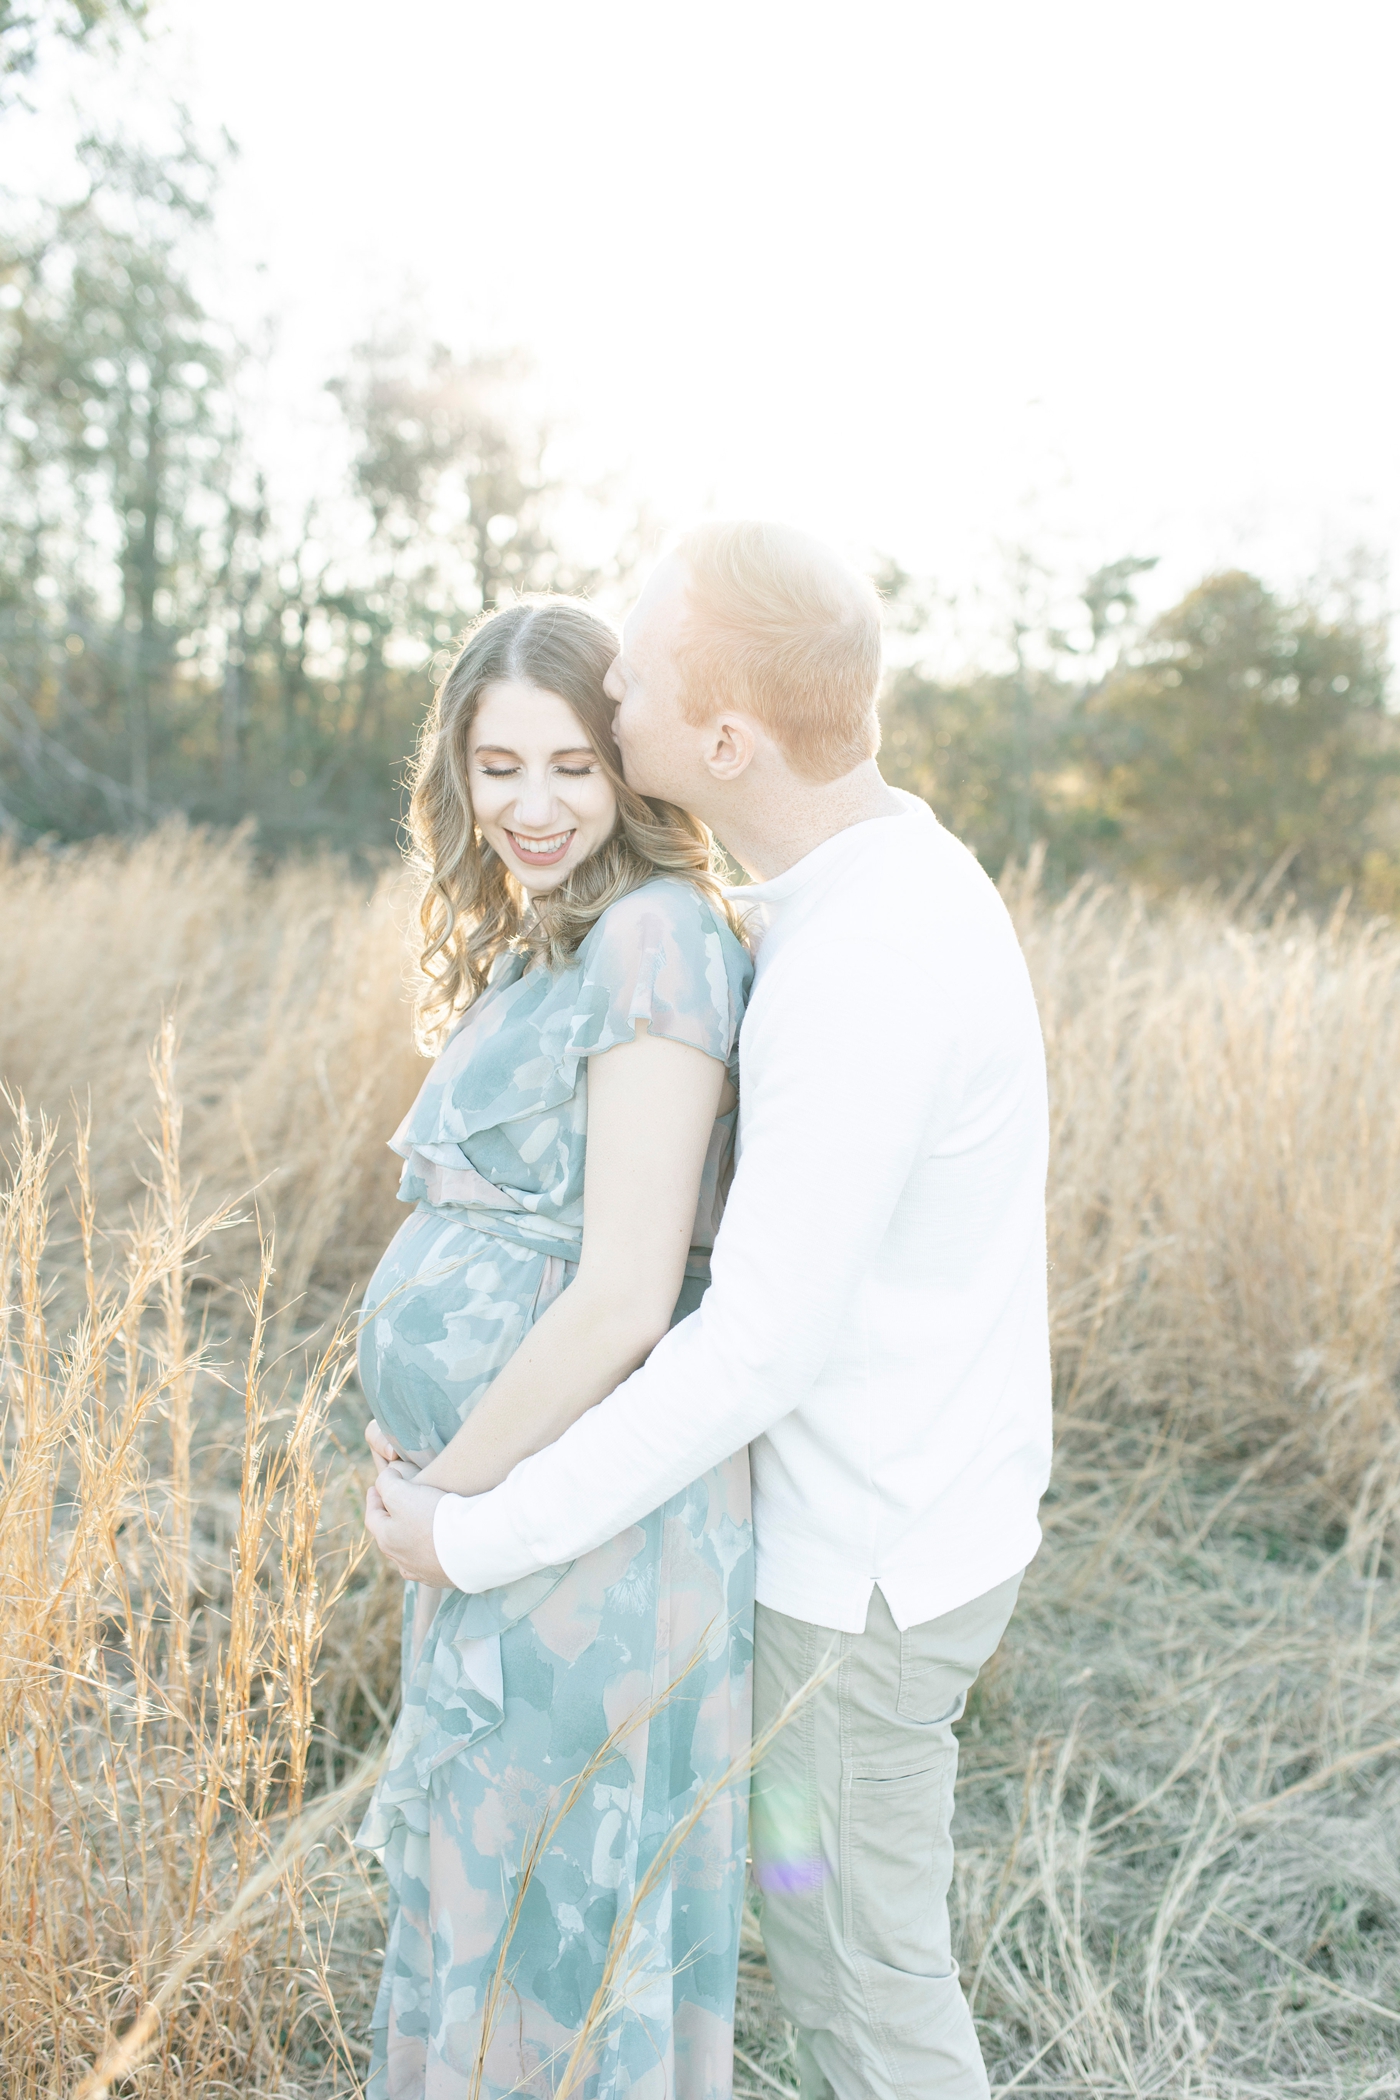 Golden hour sunset photos with new parents. Photo by Little Sunshine Photography.